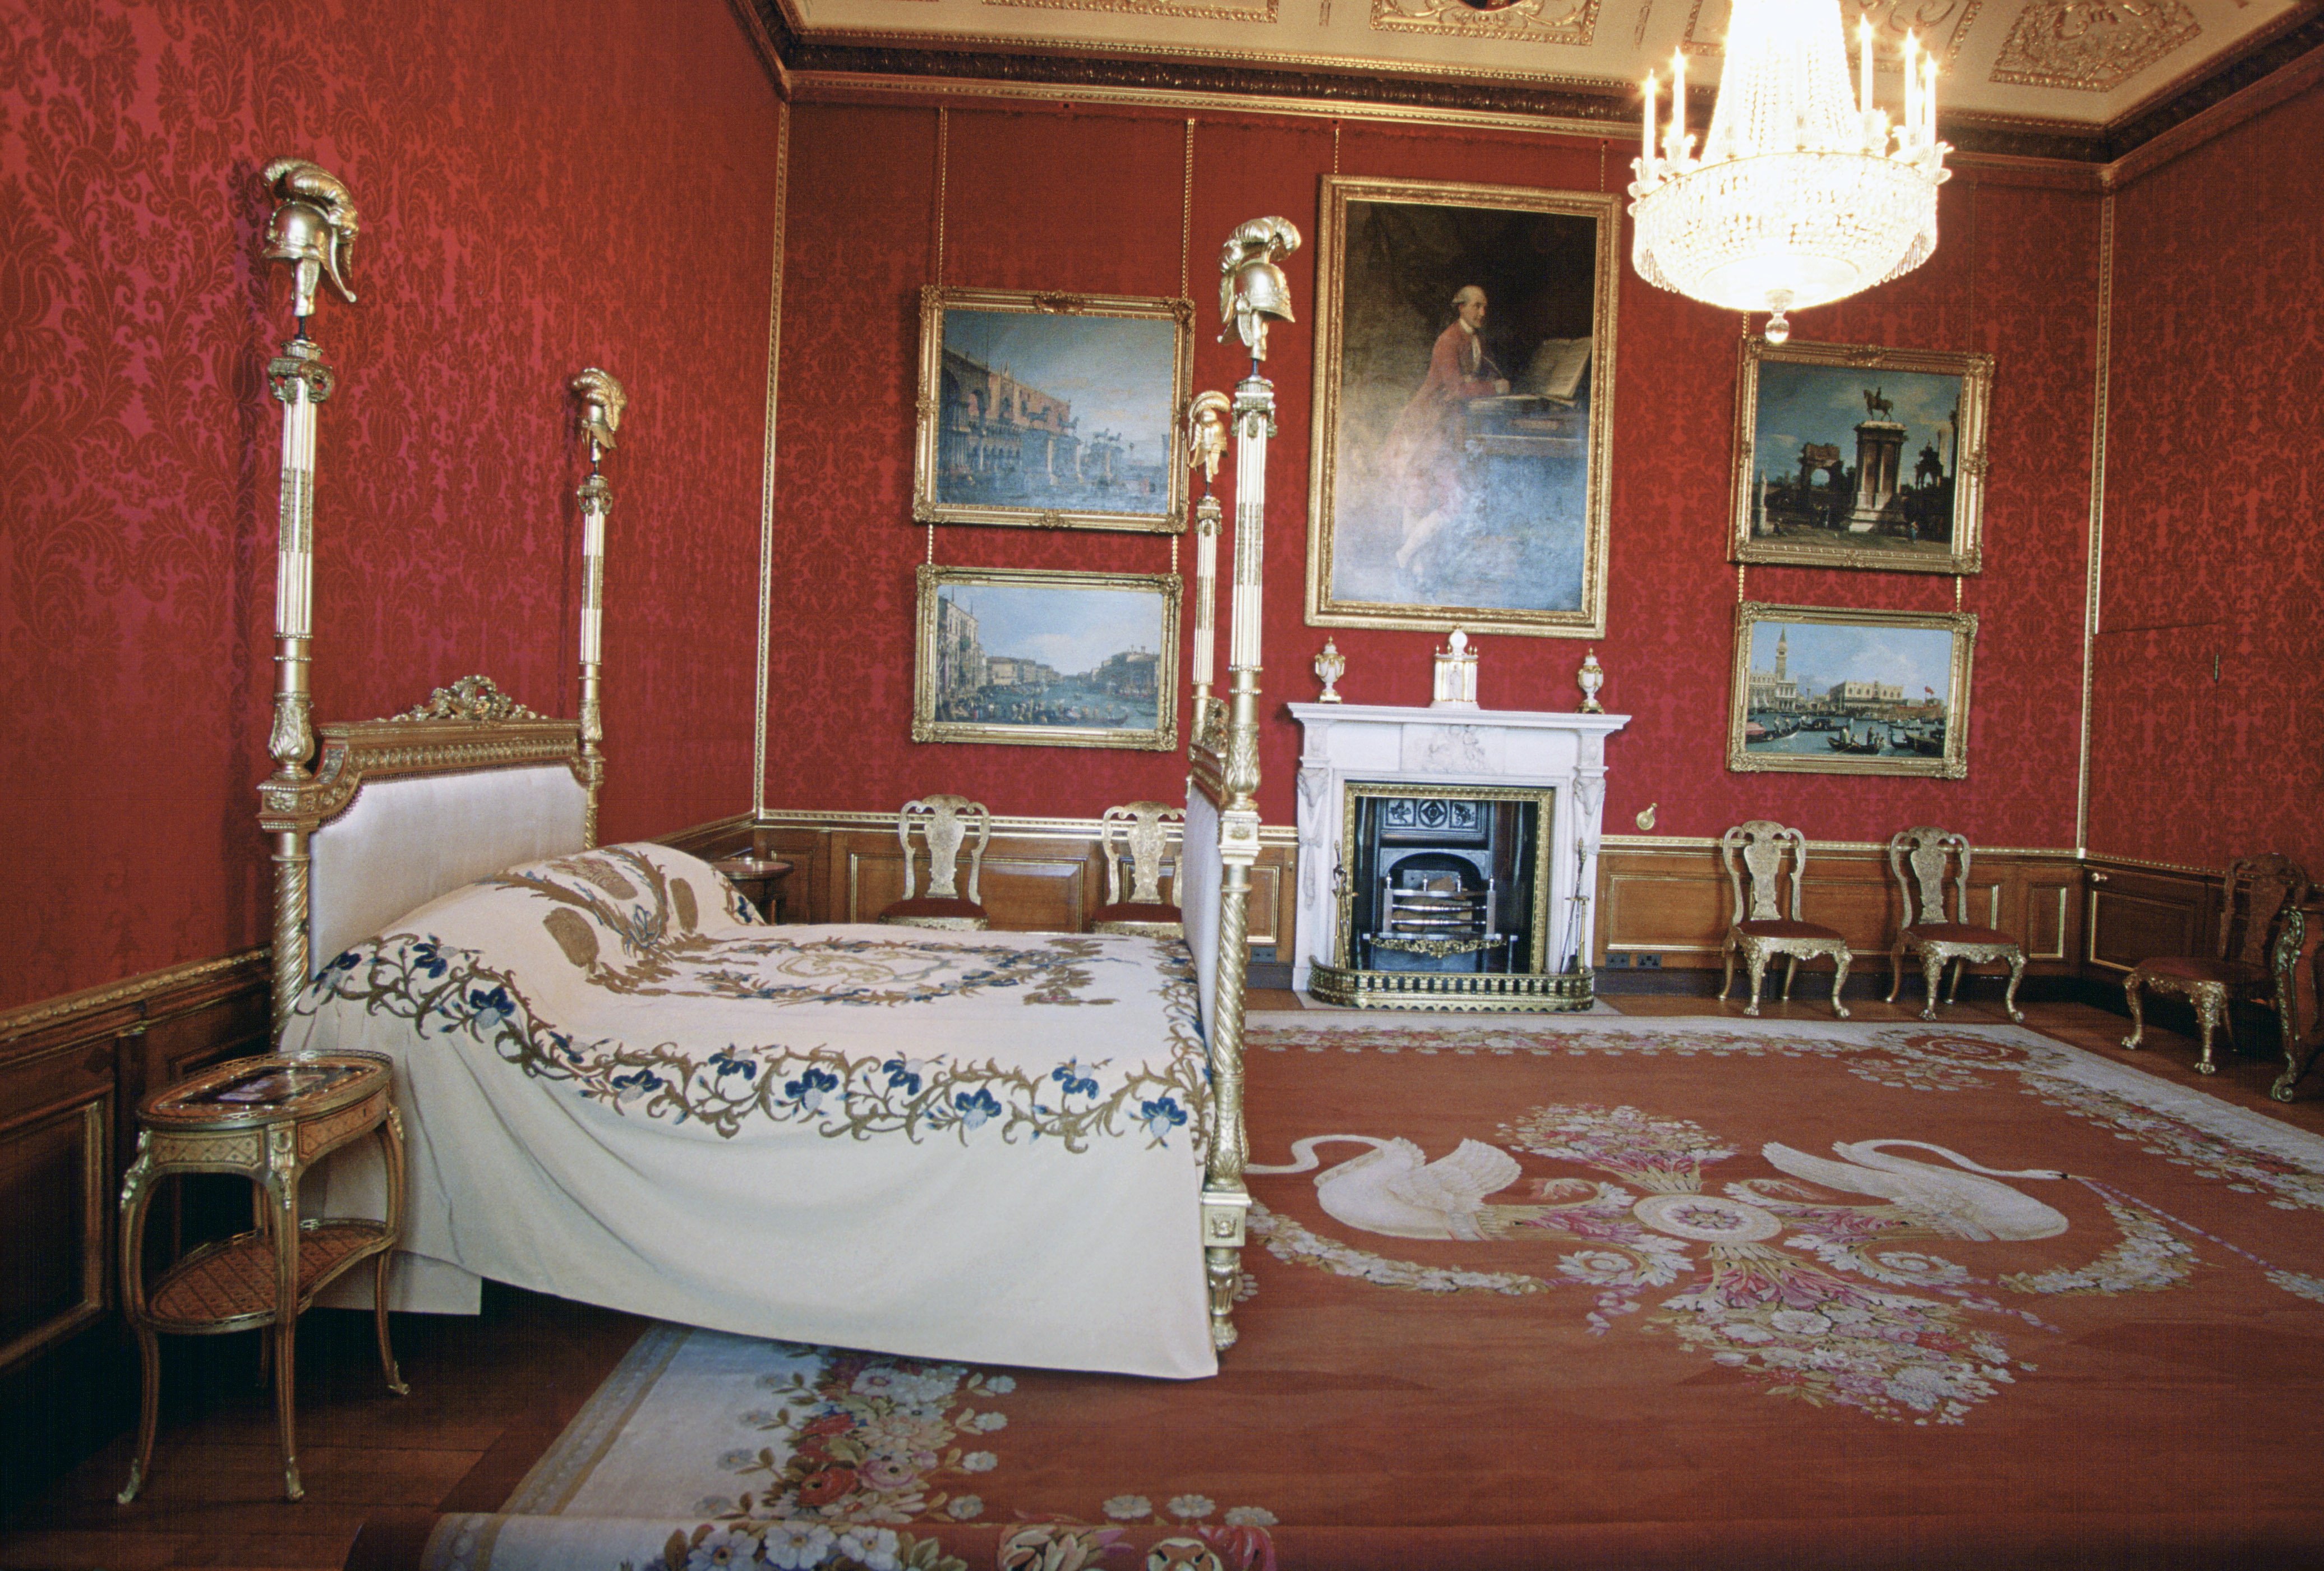  Interiors Of Windor Castle - The Kings State Bedchamber. | Source: Getty Images